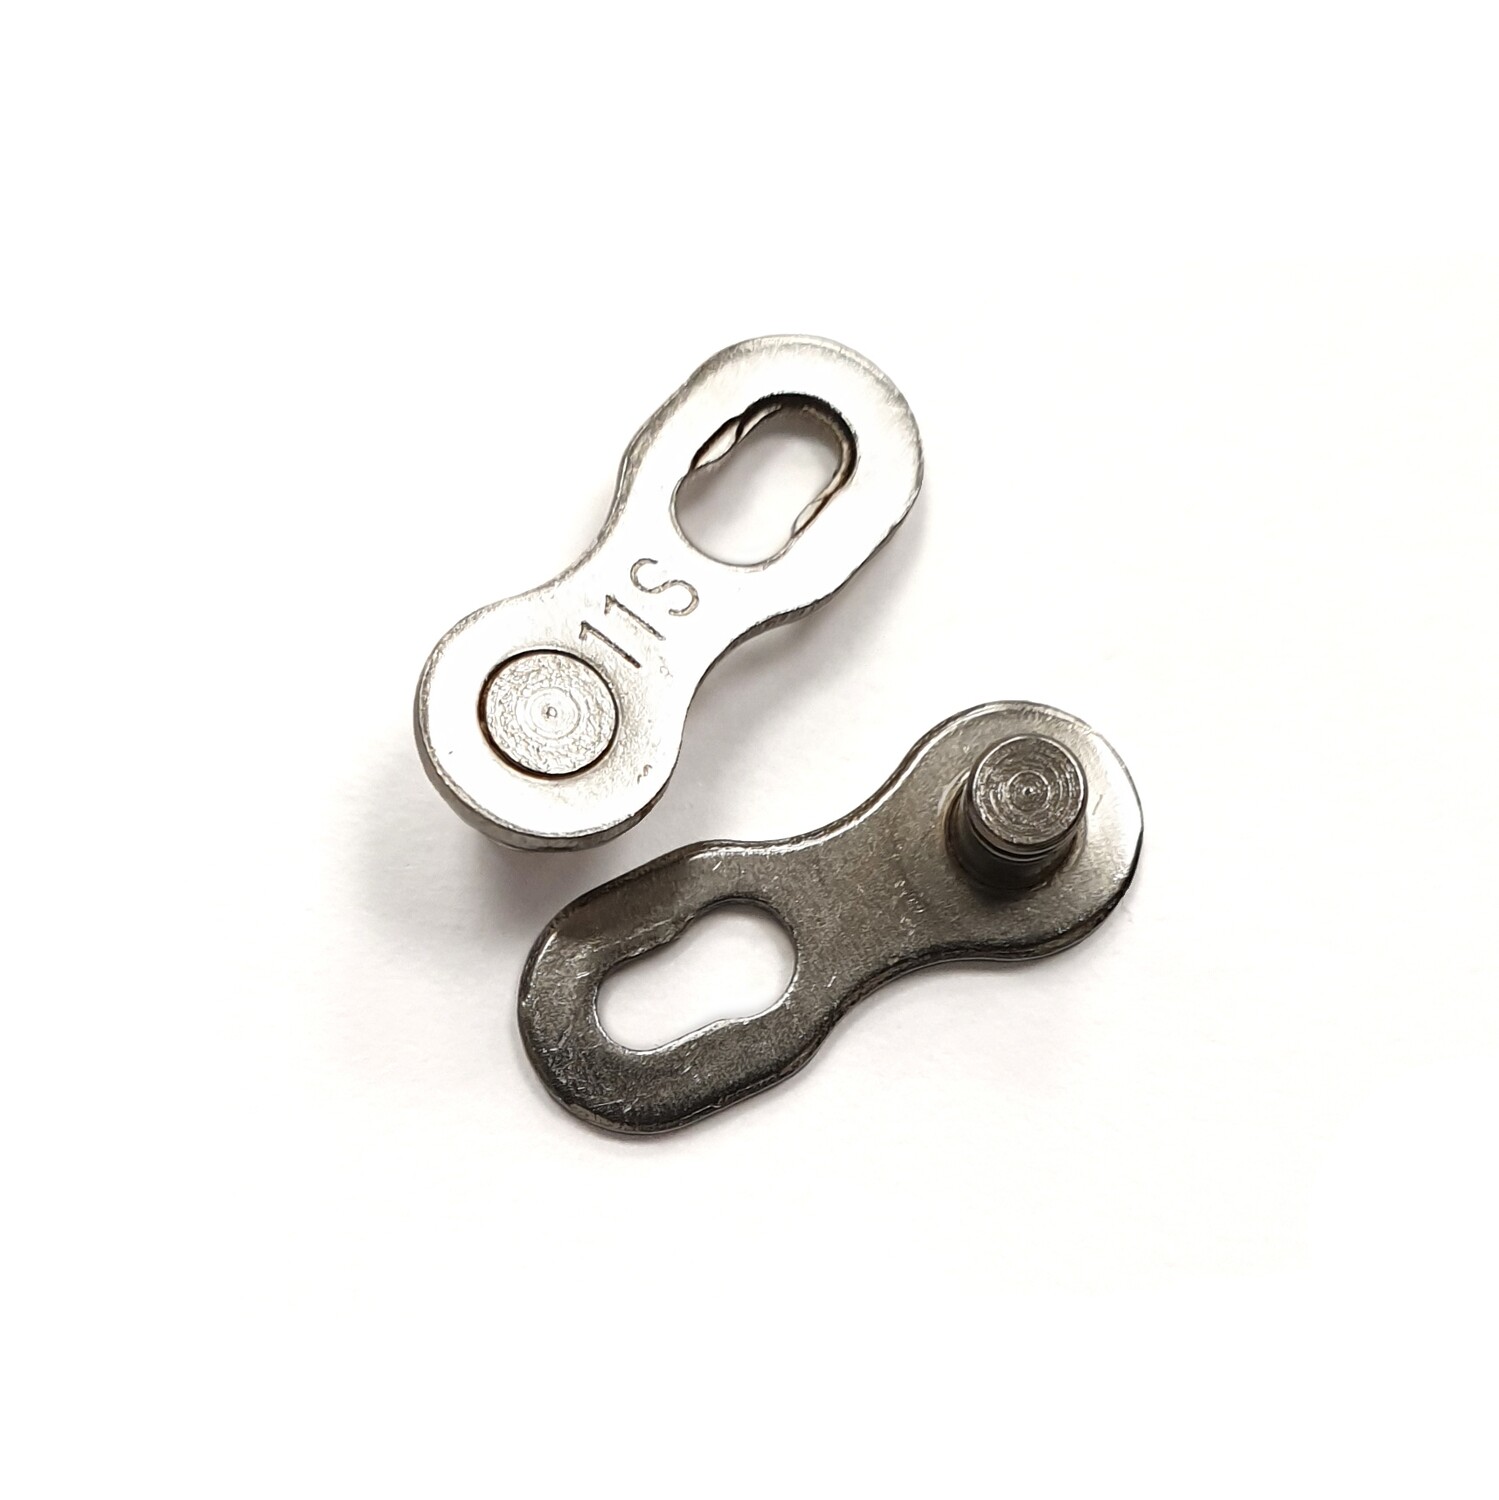 11 Speed Chain Quick Link Connector - PAIR